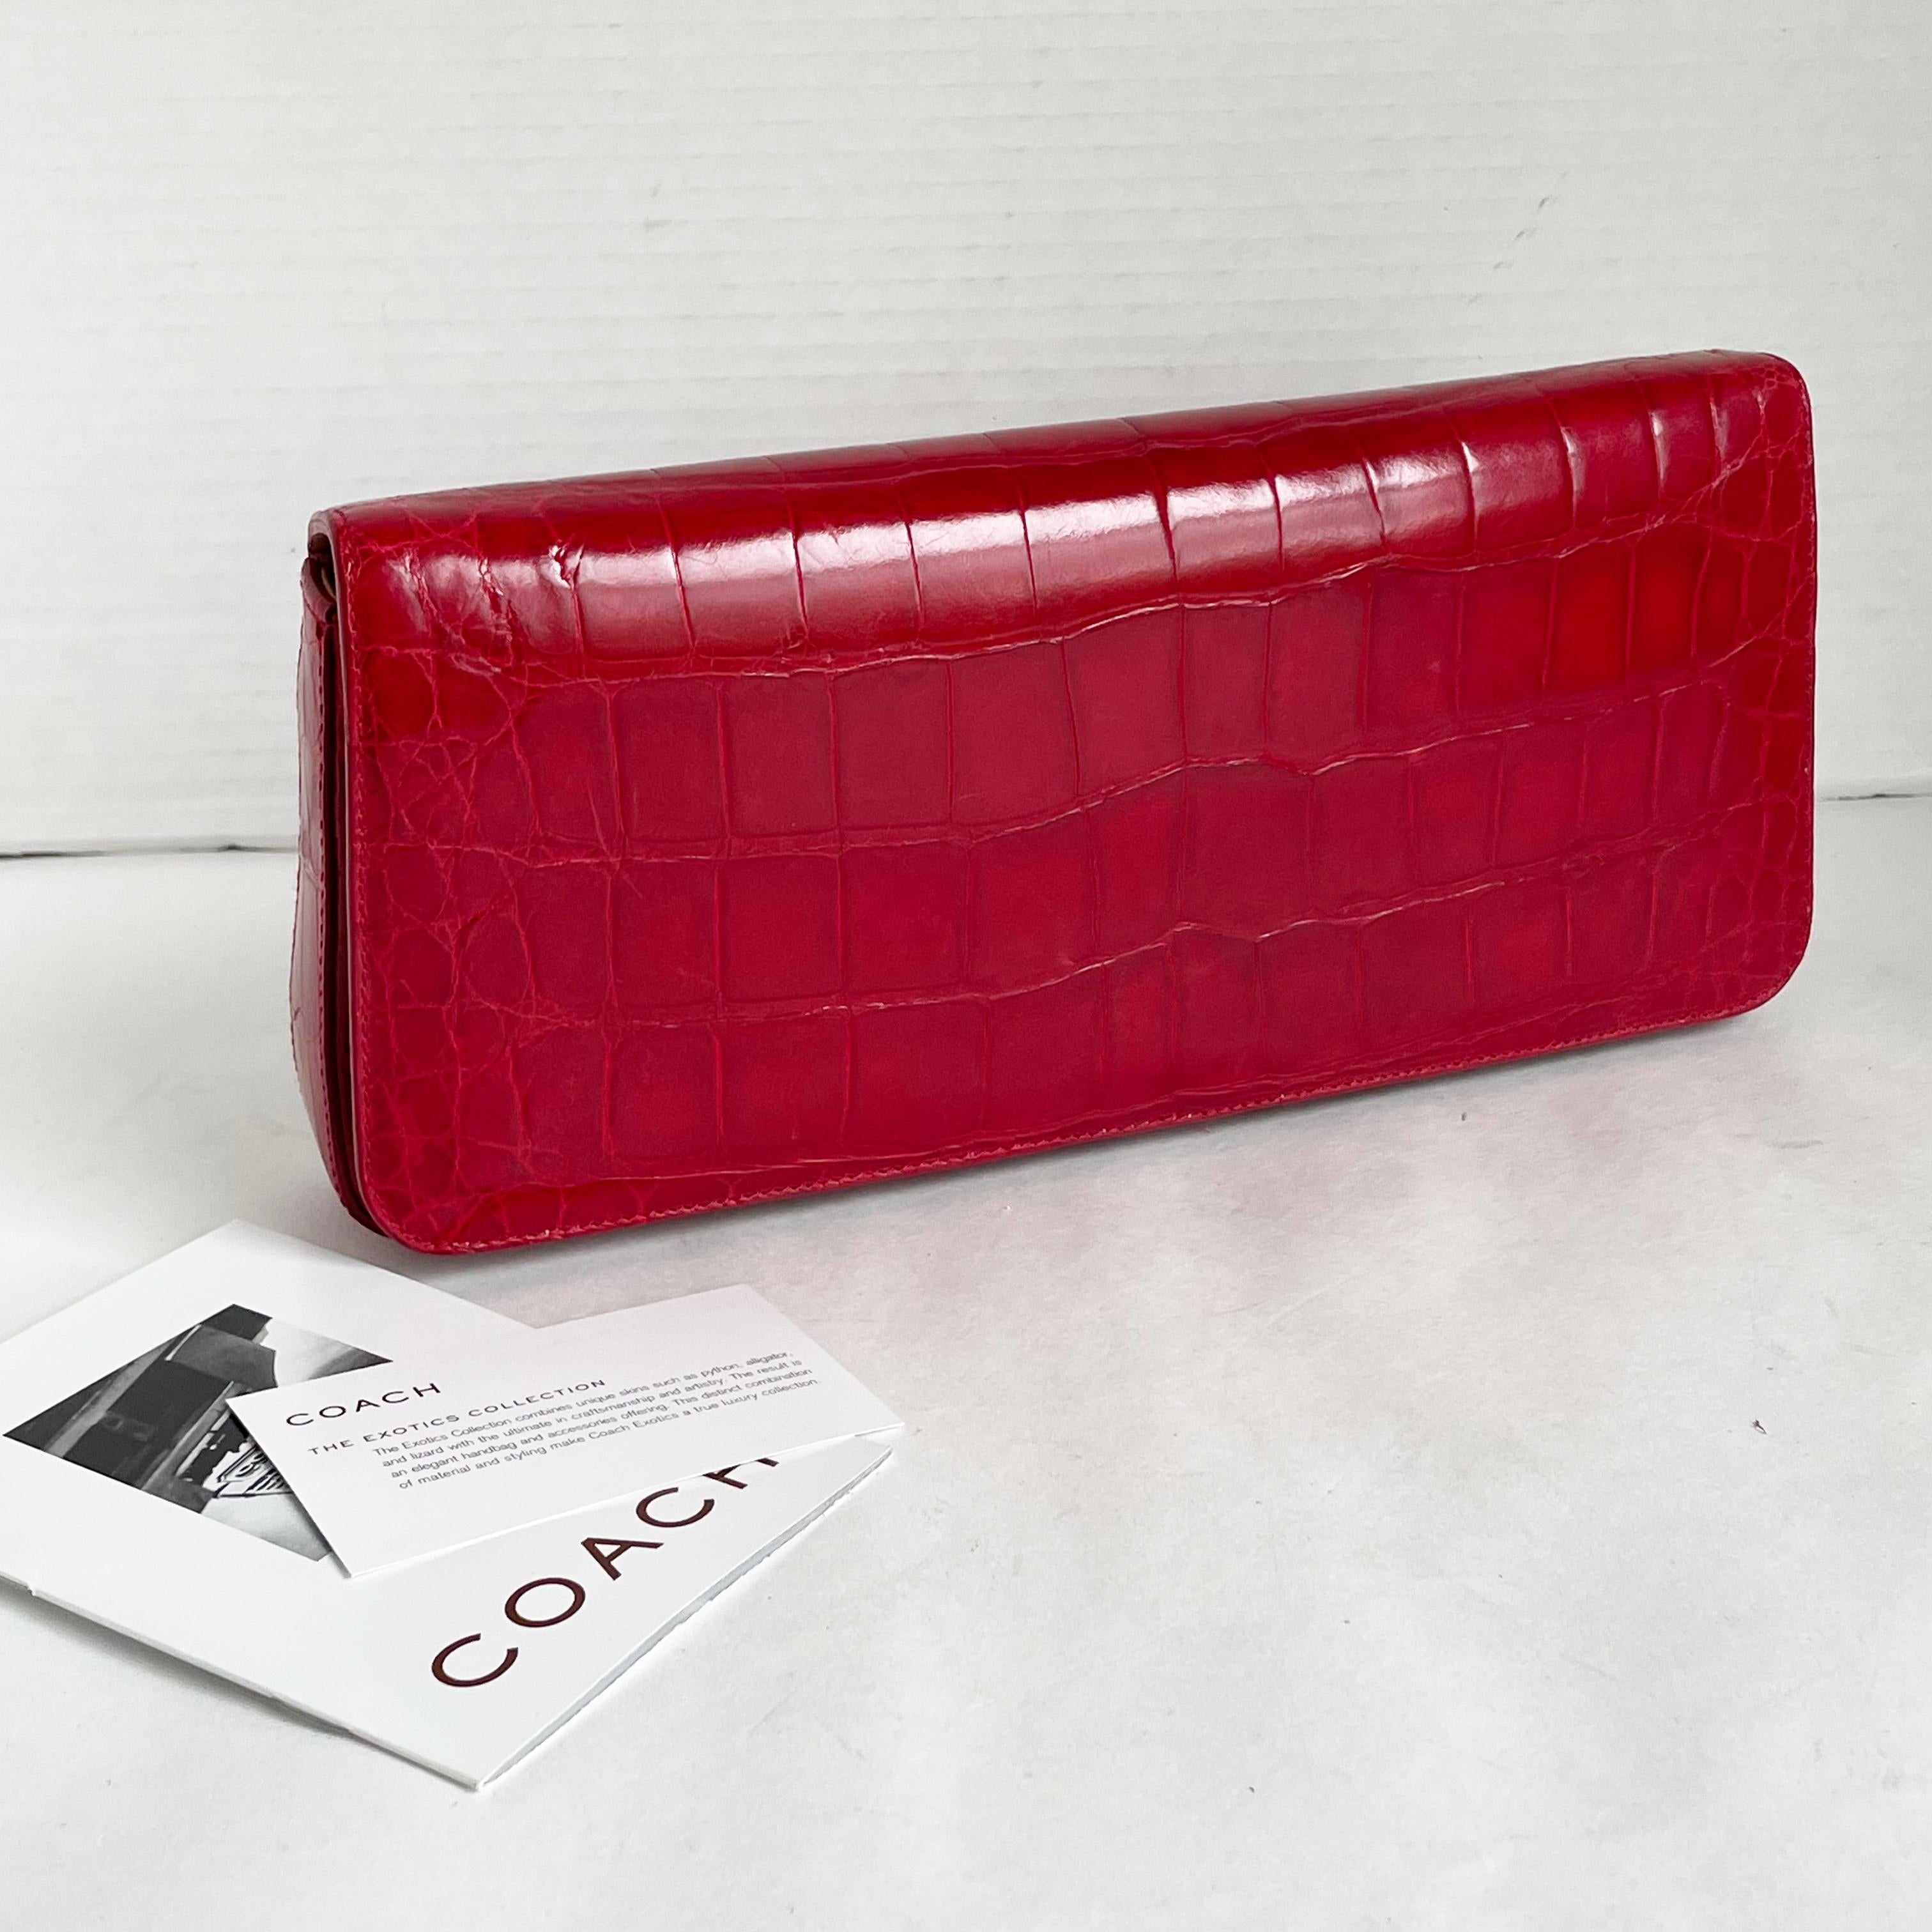 Coach Large Clutch Bag #8389 Italy Limited Edition Red Exotic Alligator HTF Rare In Good Condition For Sale In Port Saint Lucie, FL